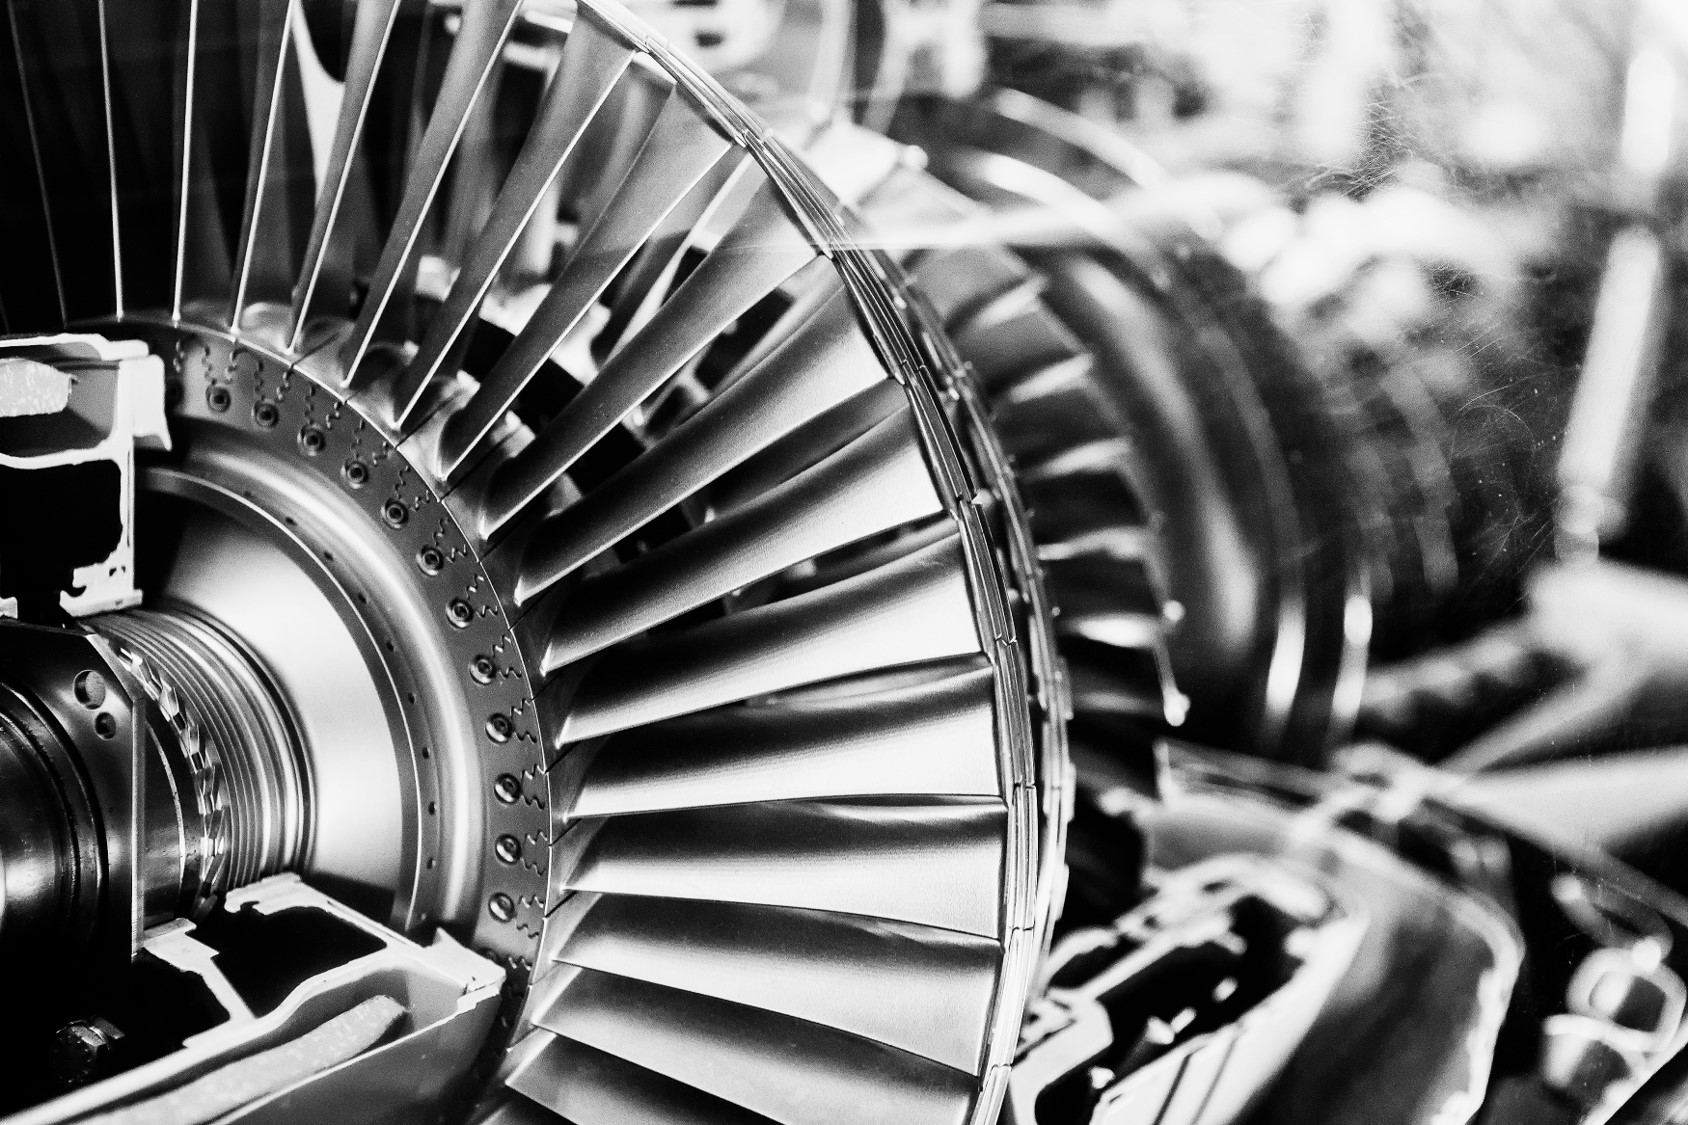 MHPS Secures First Order for HydrogenCapable JSeries Gas Turbines